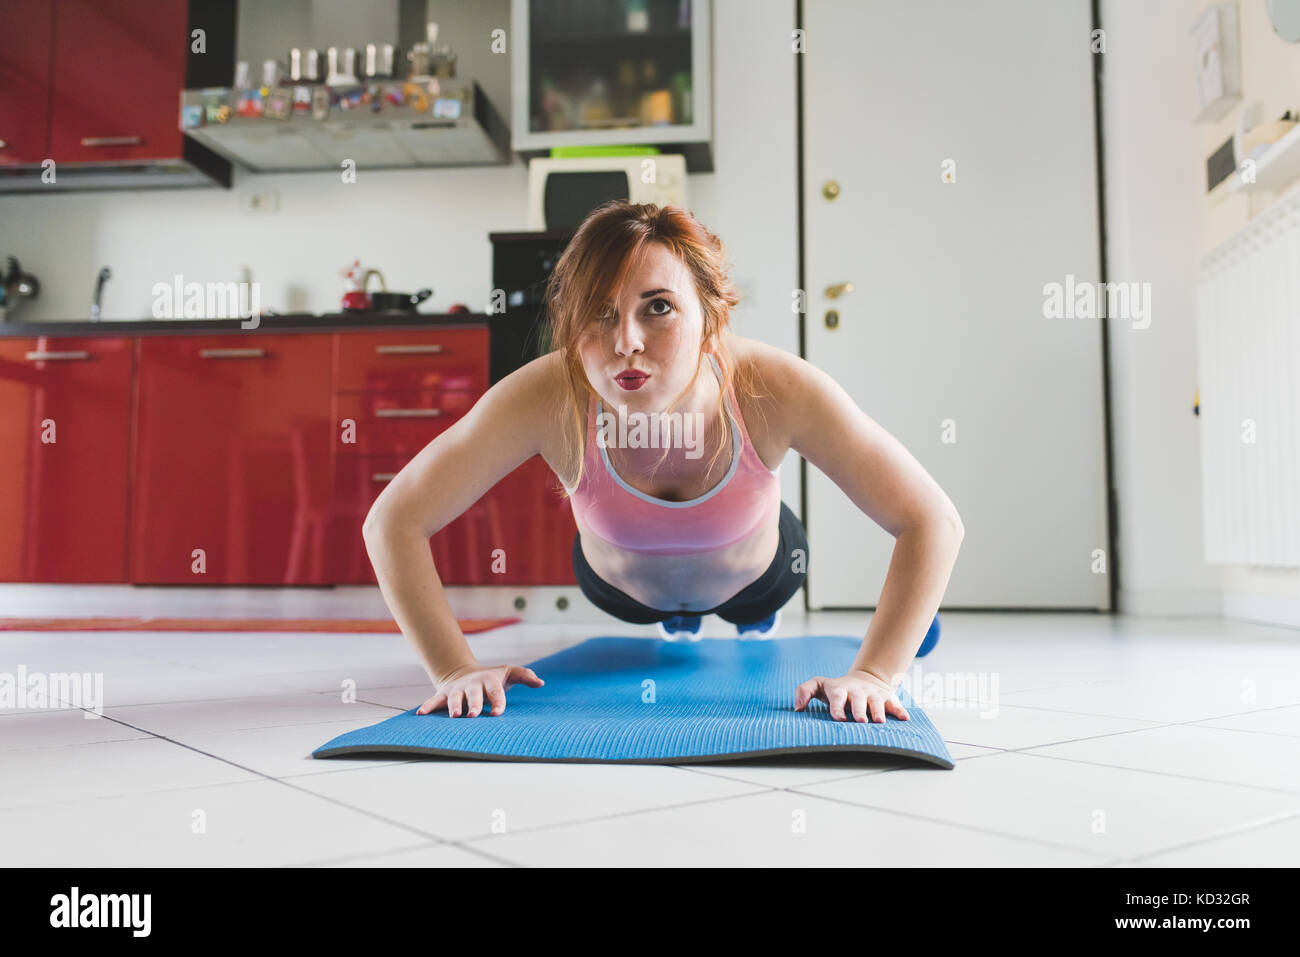 Portrait of young woman doing push ups on kitchen floor Stock Photo